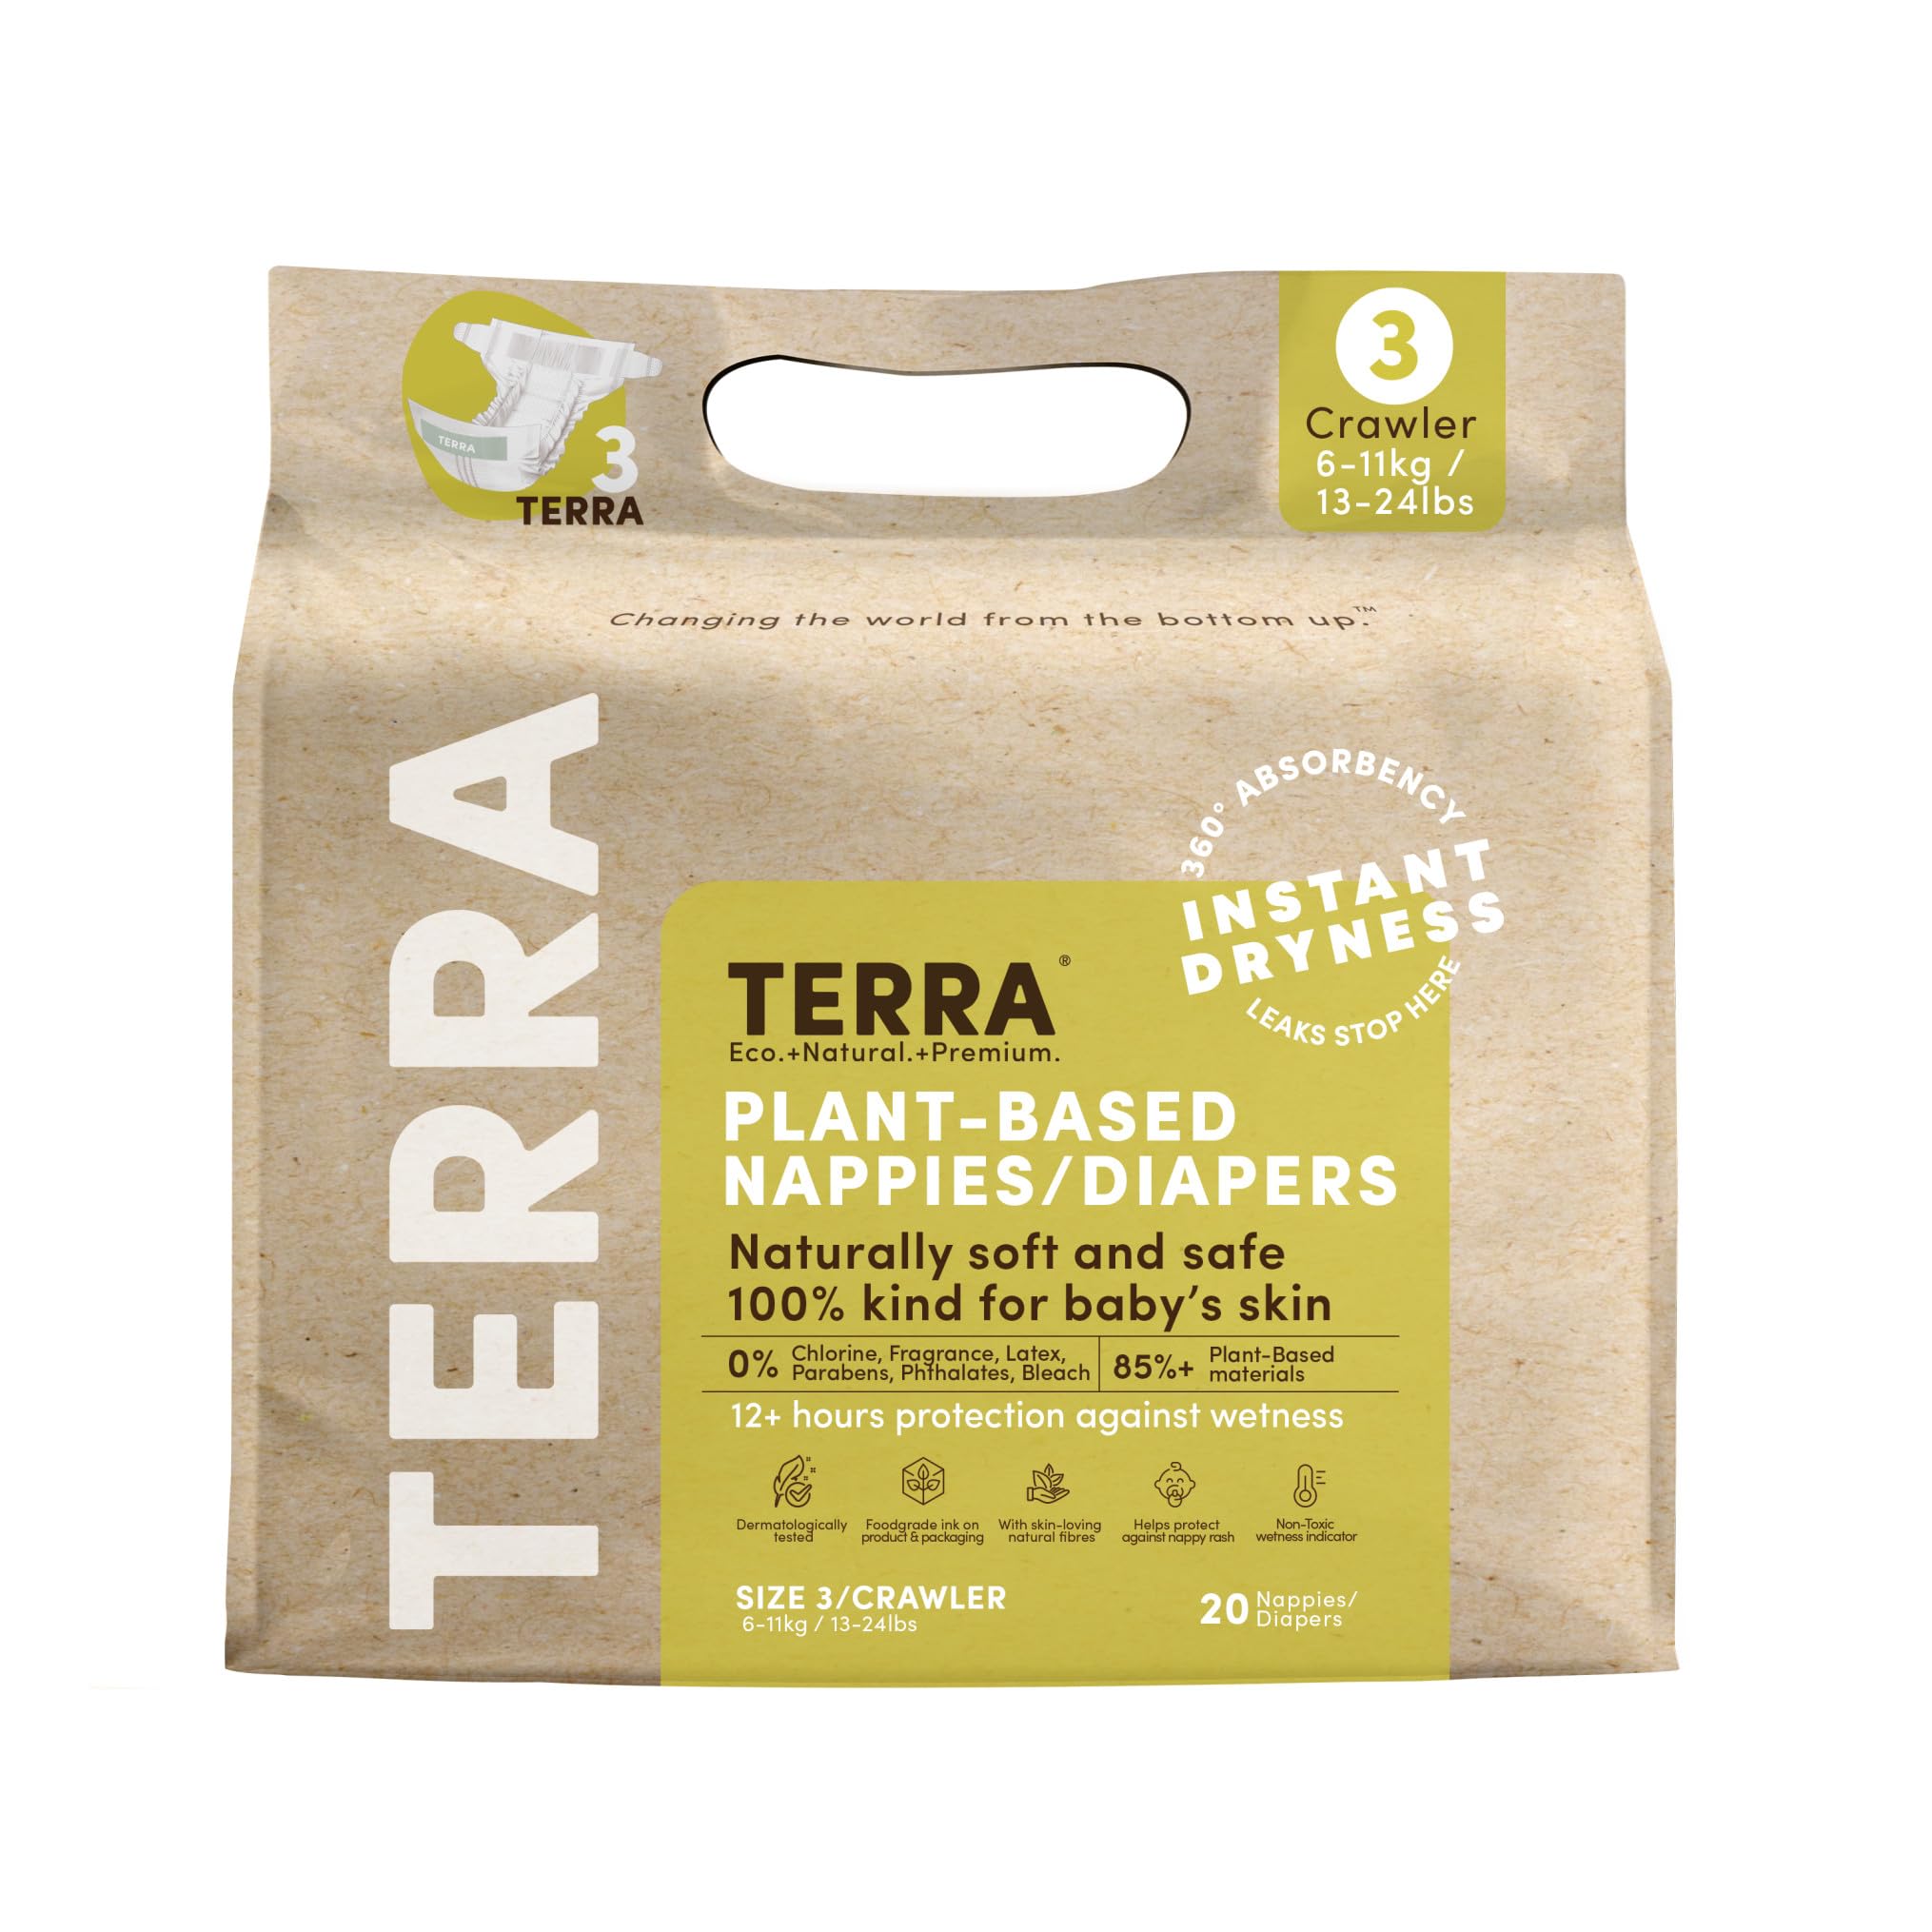 Terra Size 3 Diapers: 85% Plant-Based Diapers, Ultra-Soft & Chemical-Free for Sensitive Skin, Superior Absorbency for Day or Nighttime Diapers, Designed for Babies 13-24 Pounds, 20 Count